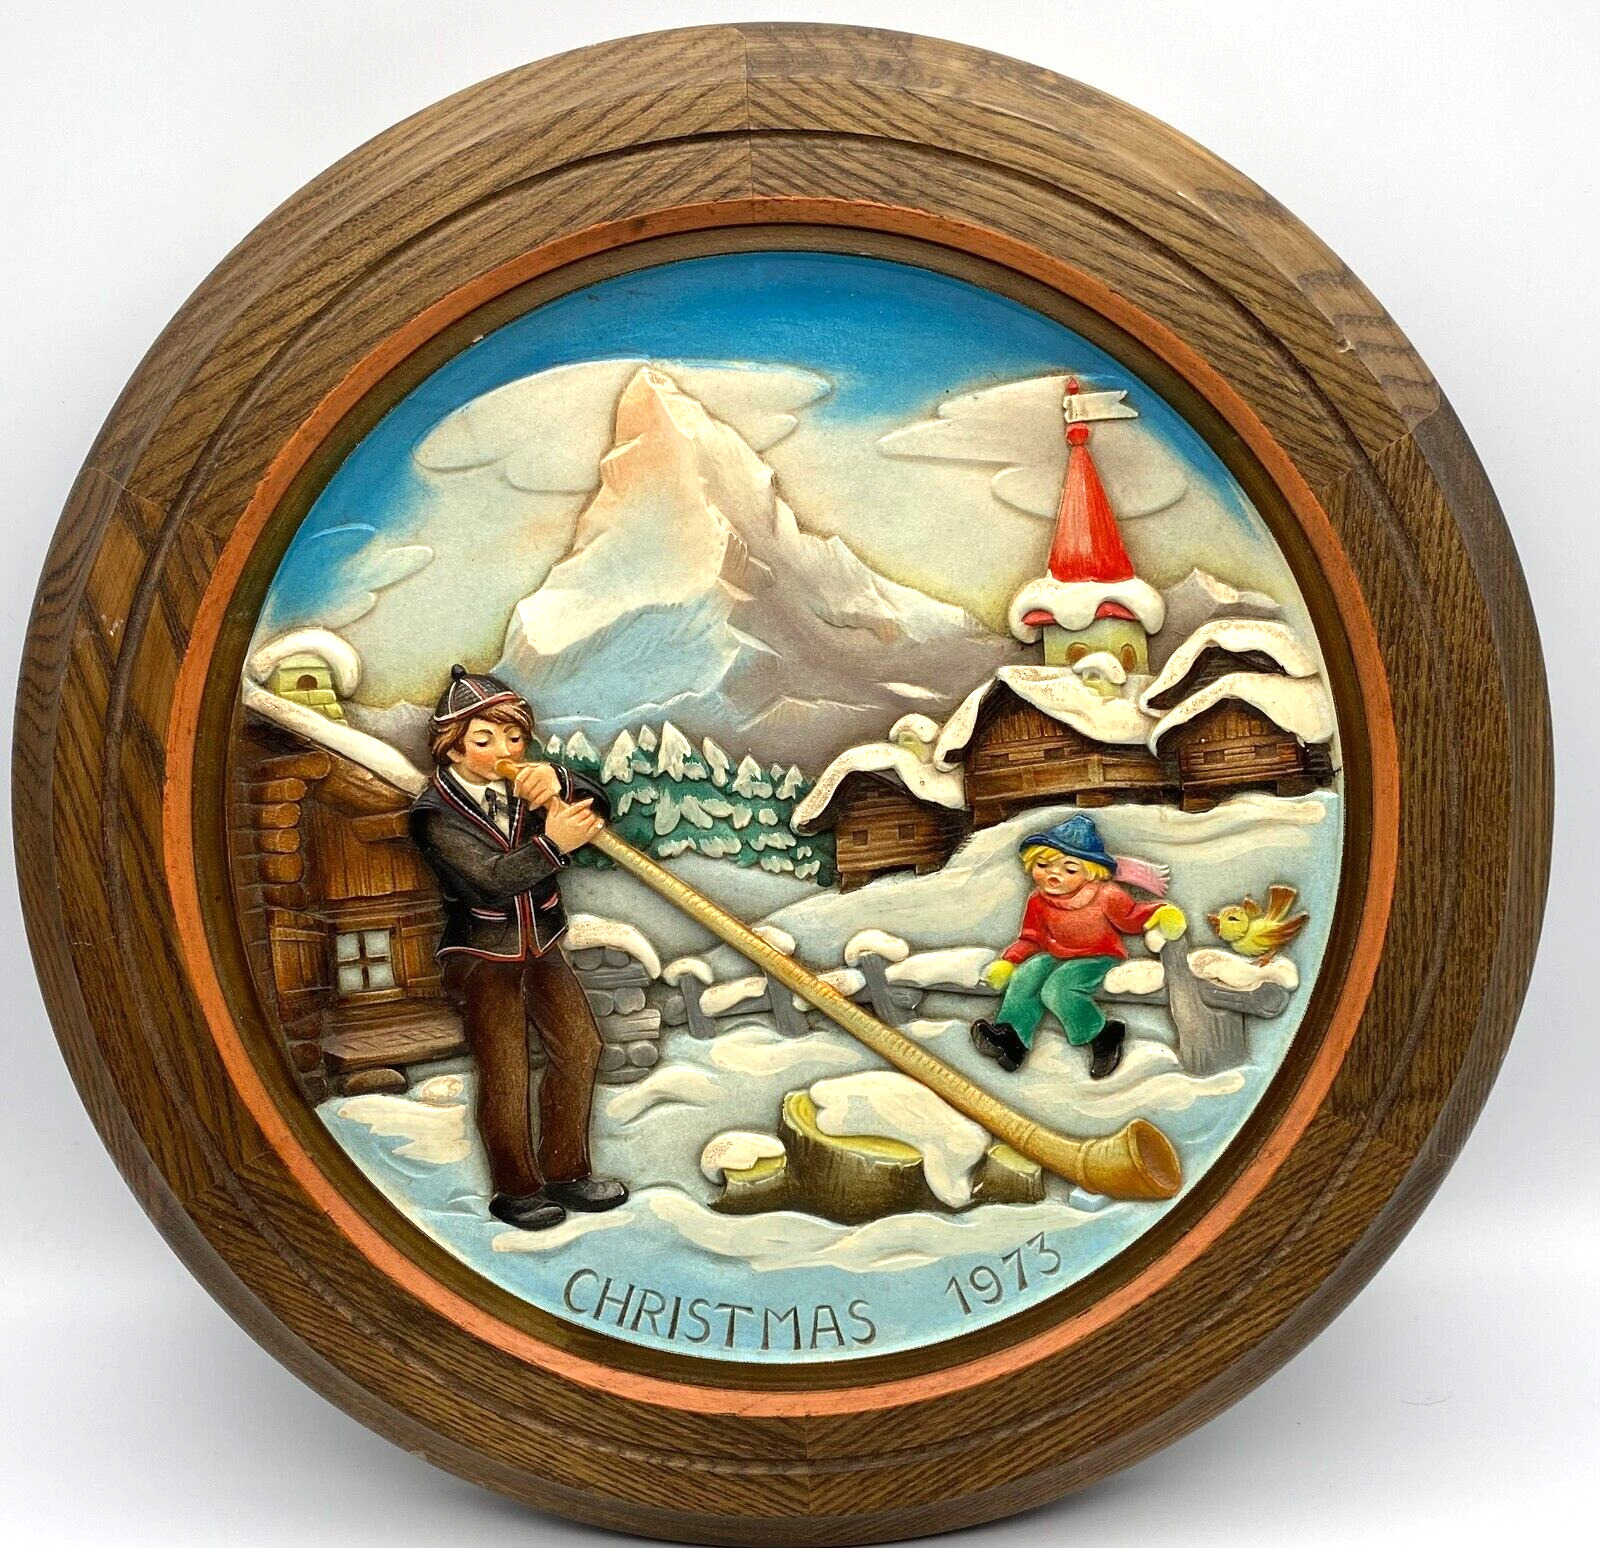 Vintage Anri Christmas Day 1973 Alphorn Wooden Wood Carved Wall Plate 0823 Italy